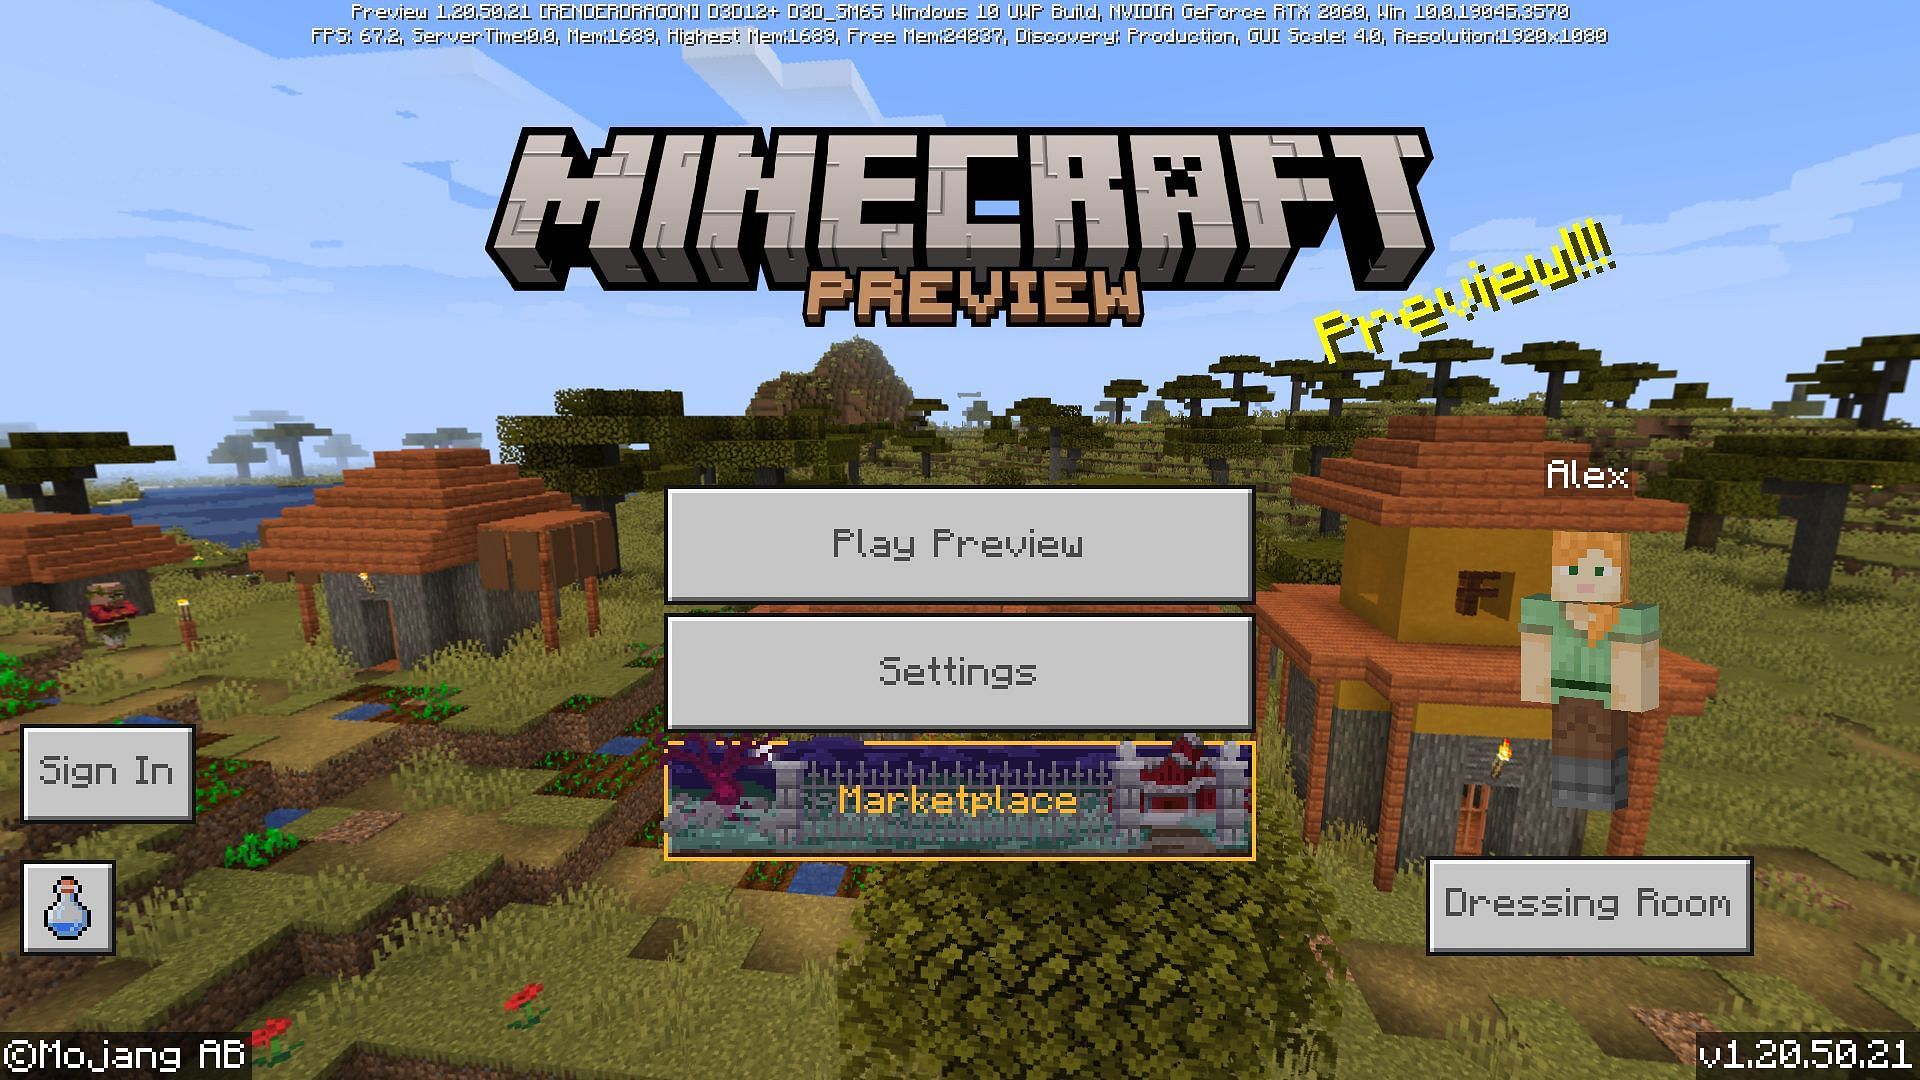 The advent of the Minecraft Launcher makes accessing the preview easy on Windows PCs (Image via Mojang)